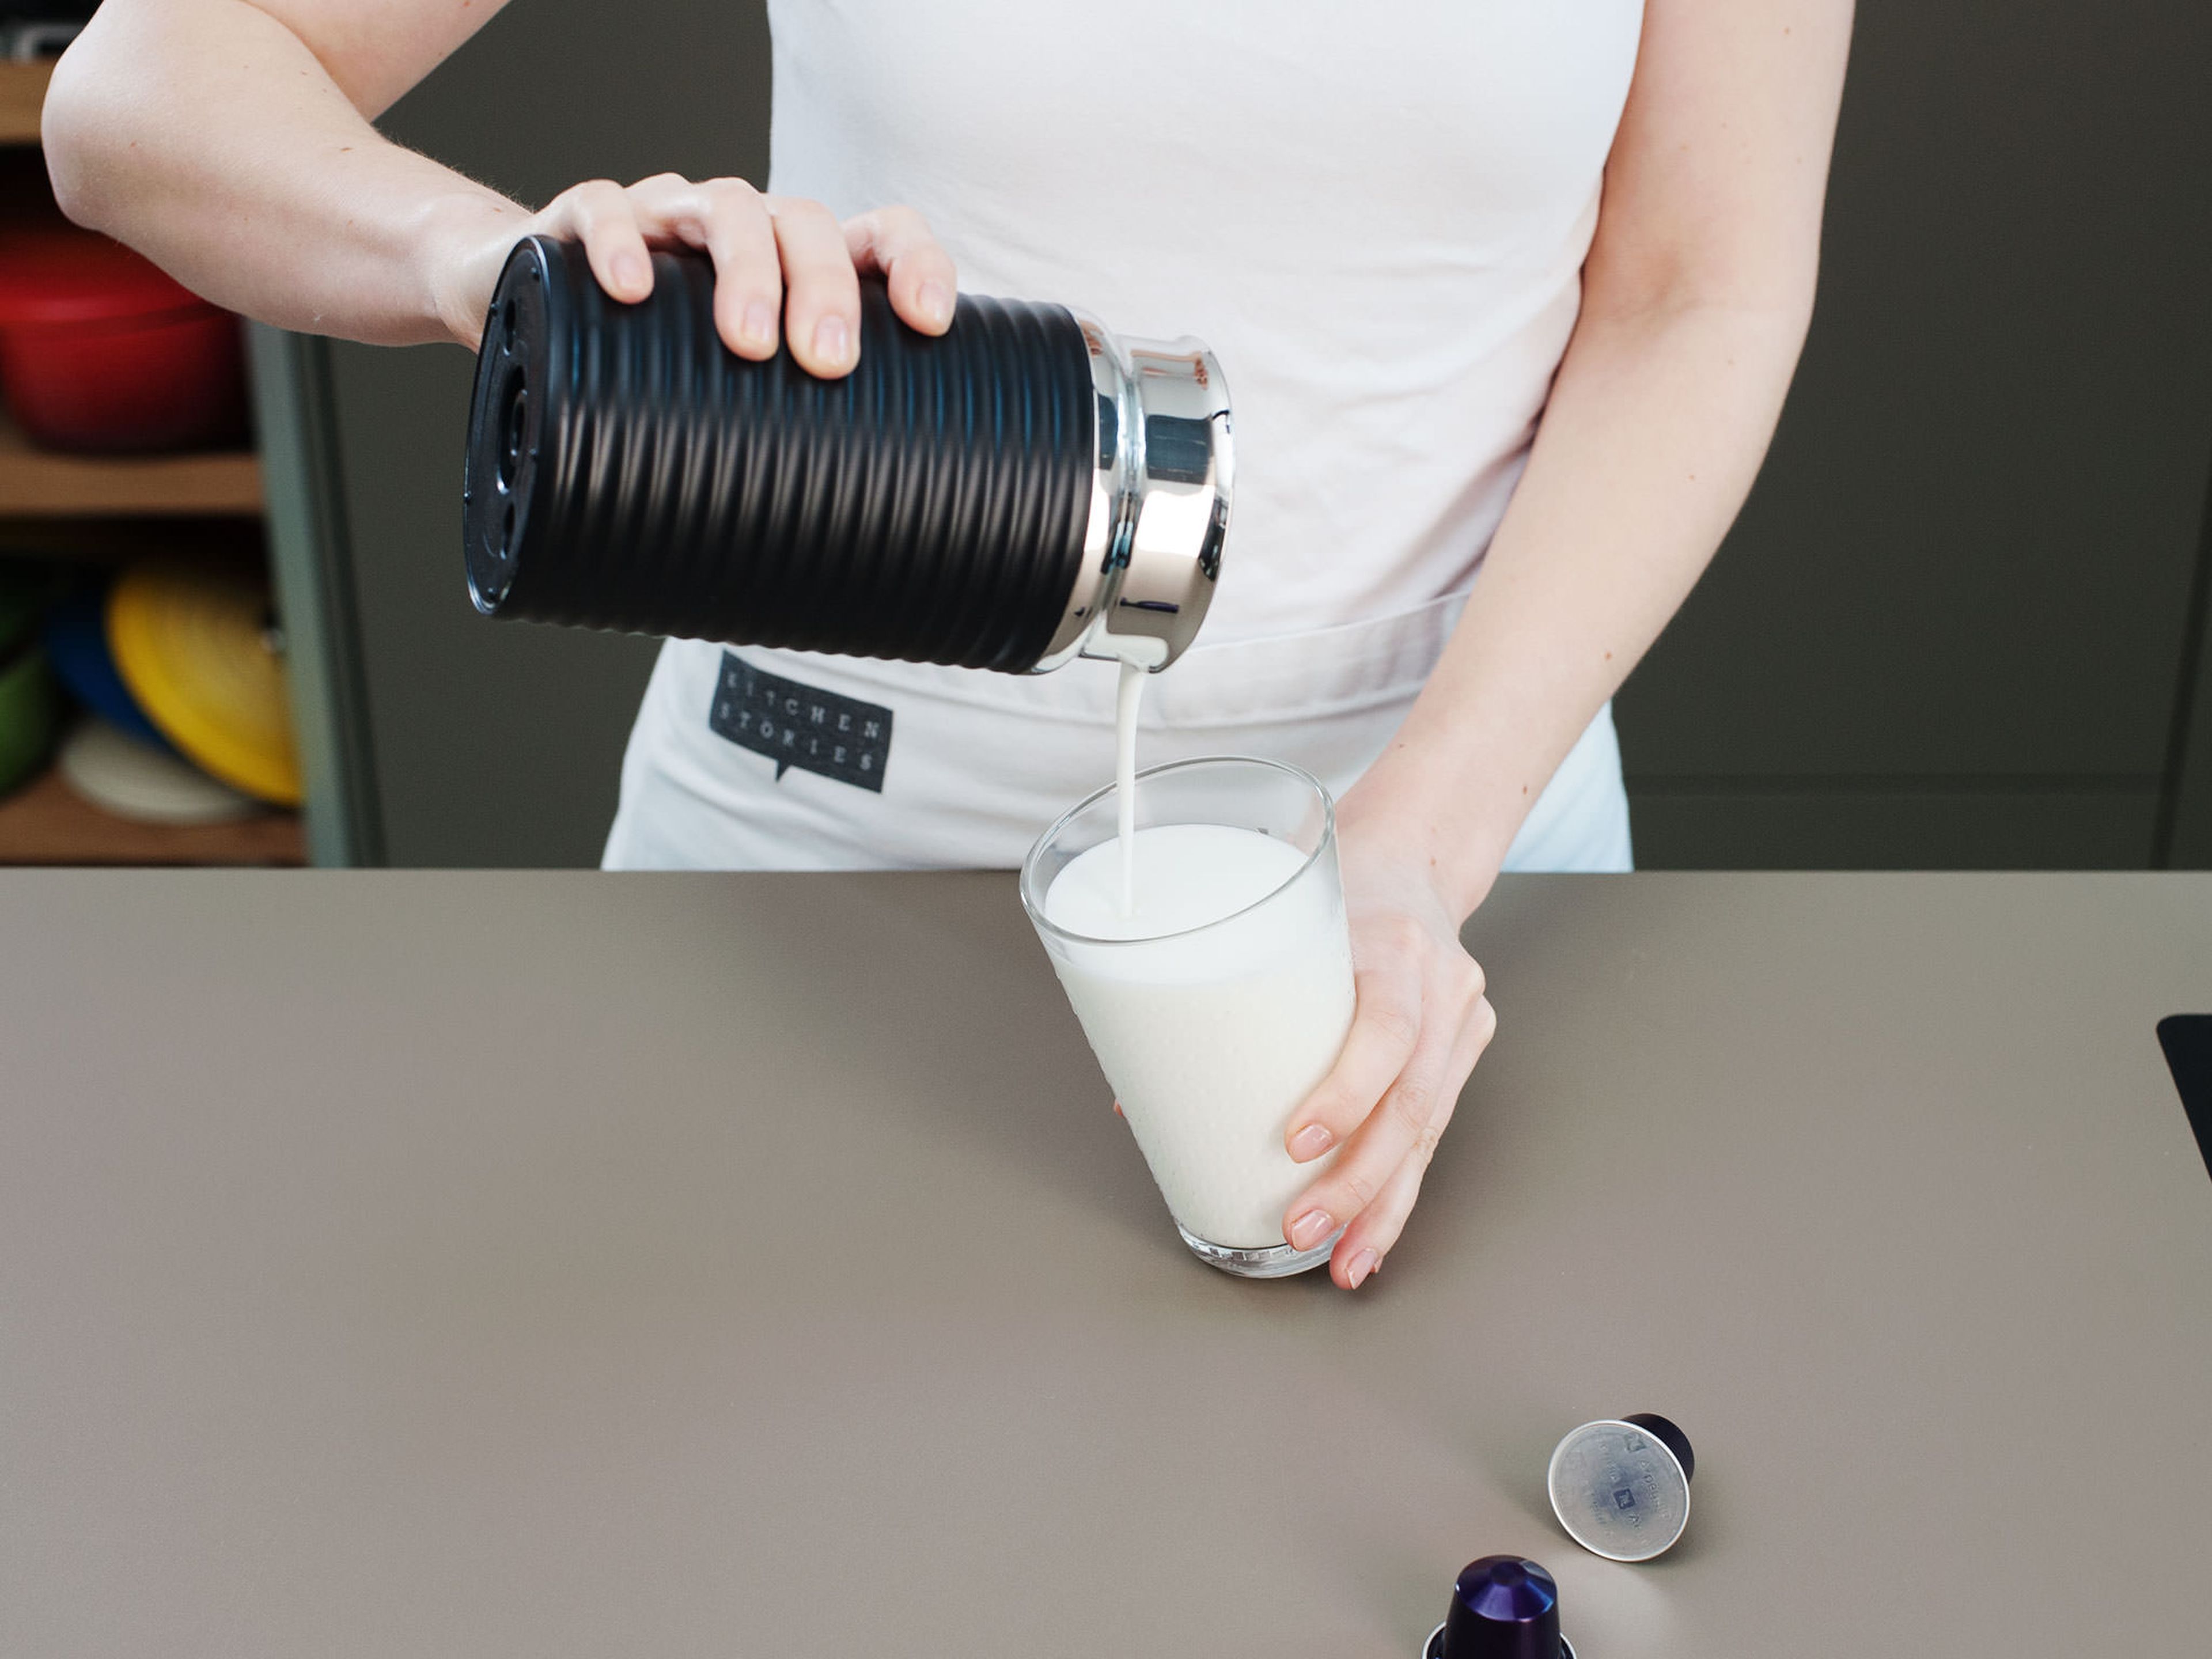 Using your Nespresso milk frother, froth milk and pour in glass.